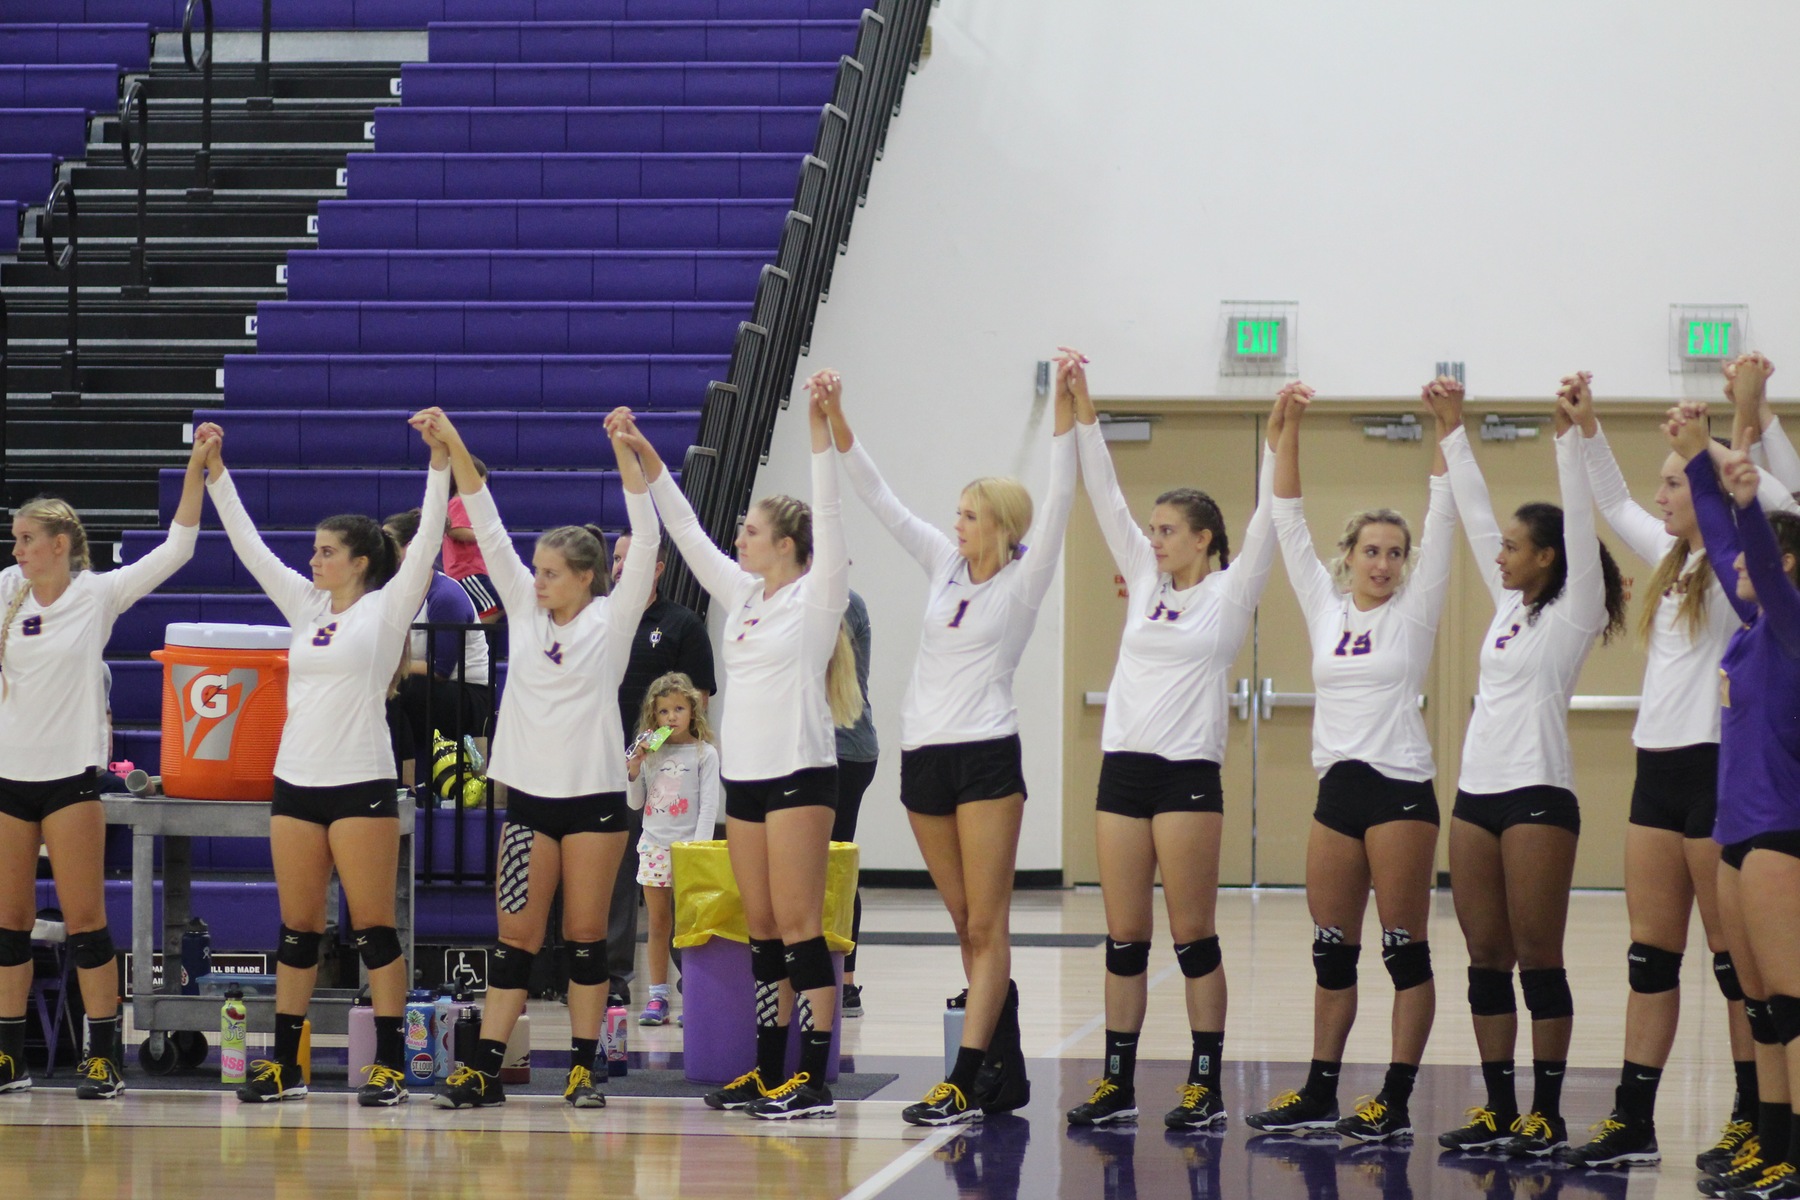 Regals Sweep Tigers to Stay Undefeated in SCIAC Play